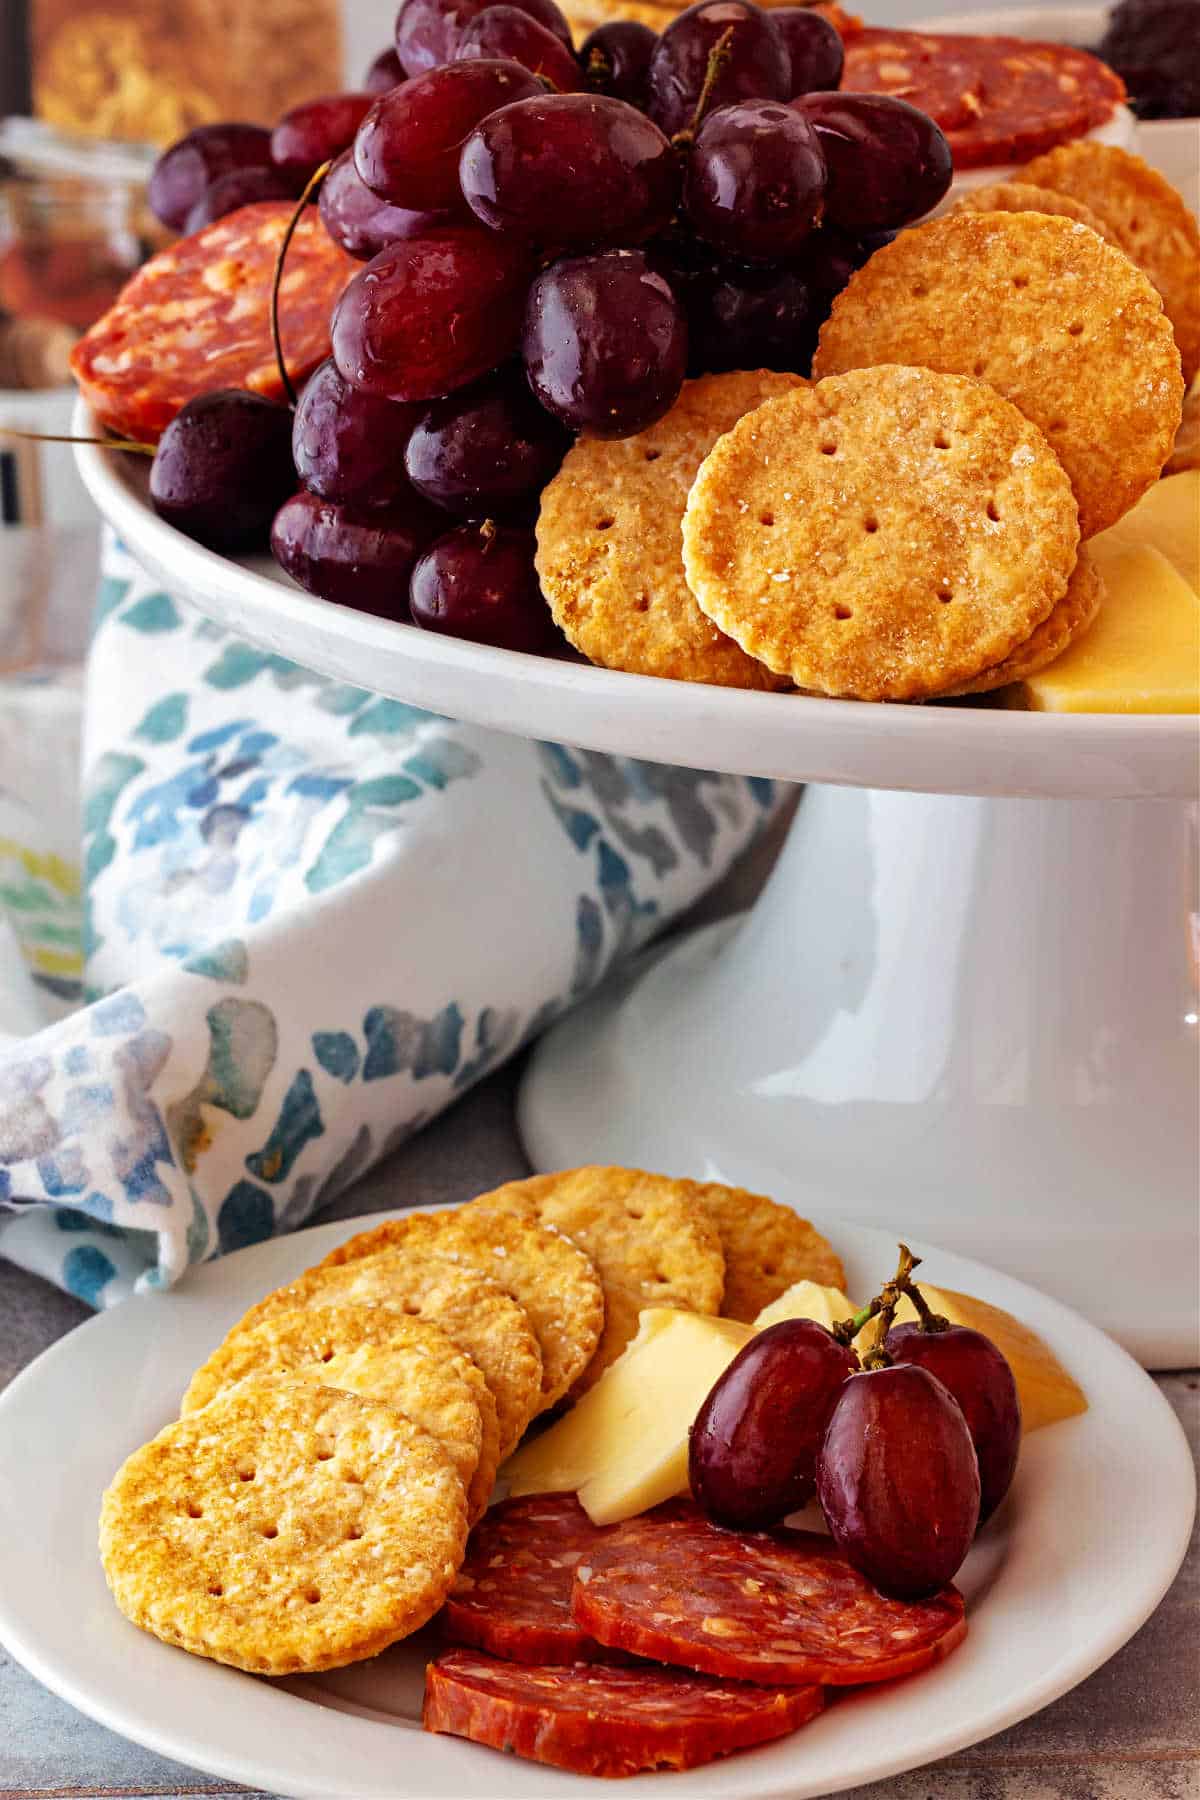 A white, ceramic cake stand folled with red grapes, cheese, and Ritz crackers. There is a small white plate next to it with Ritz, sliced sausage, some cheese, and 3 red grapes.